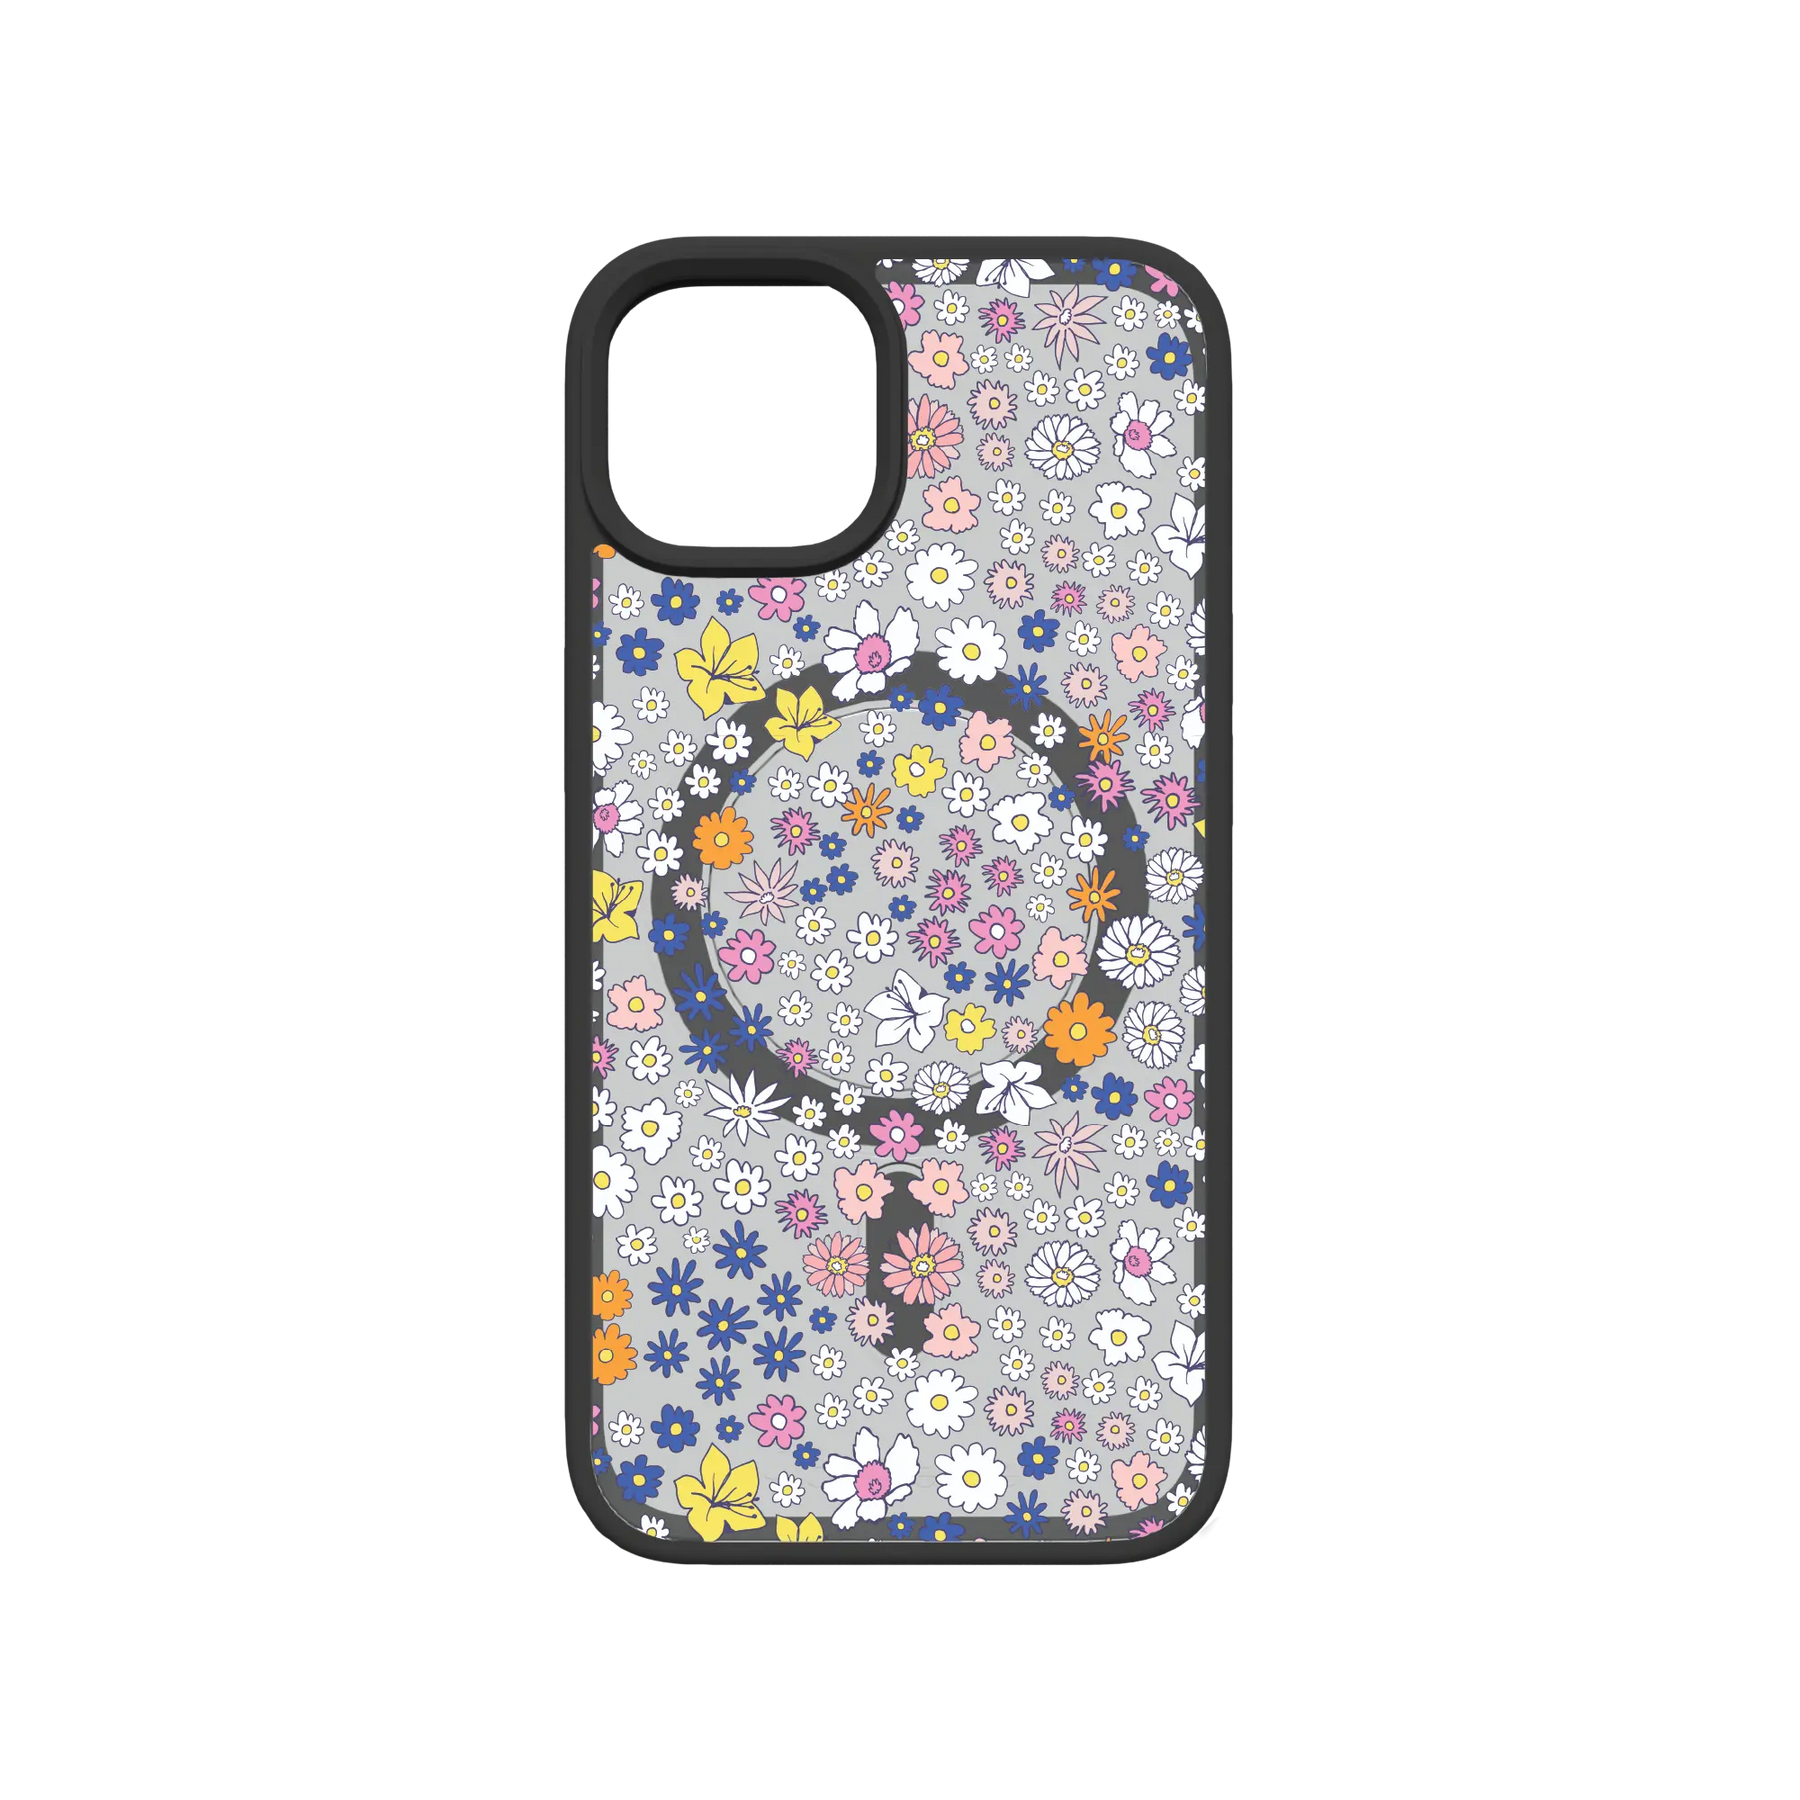 Apple-iPhone-13-Crystal-Clear Wild Blossom | Protective MagSafe Case | Flower Series for Apple iPhone 13 Series cellhelmet cellhelmet